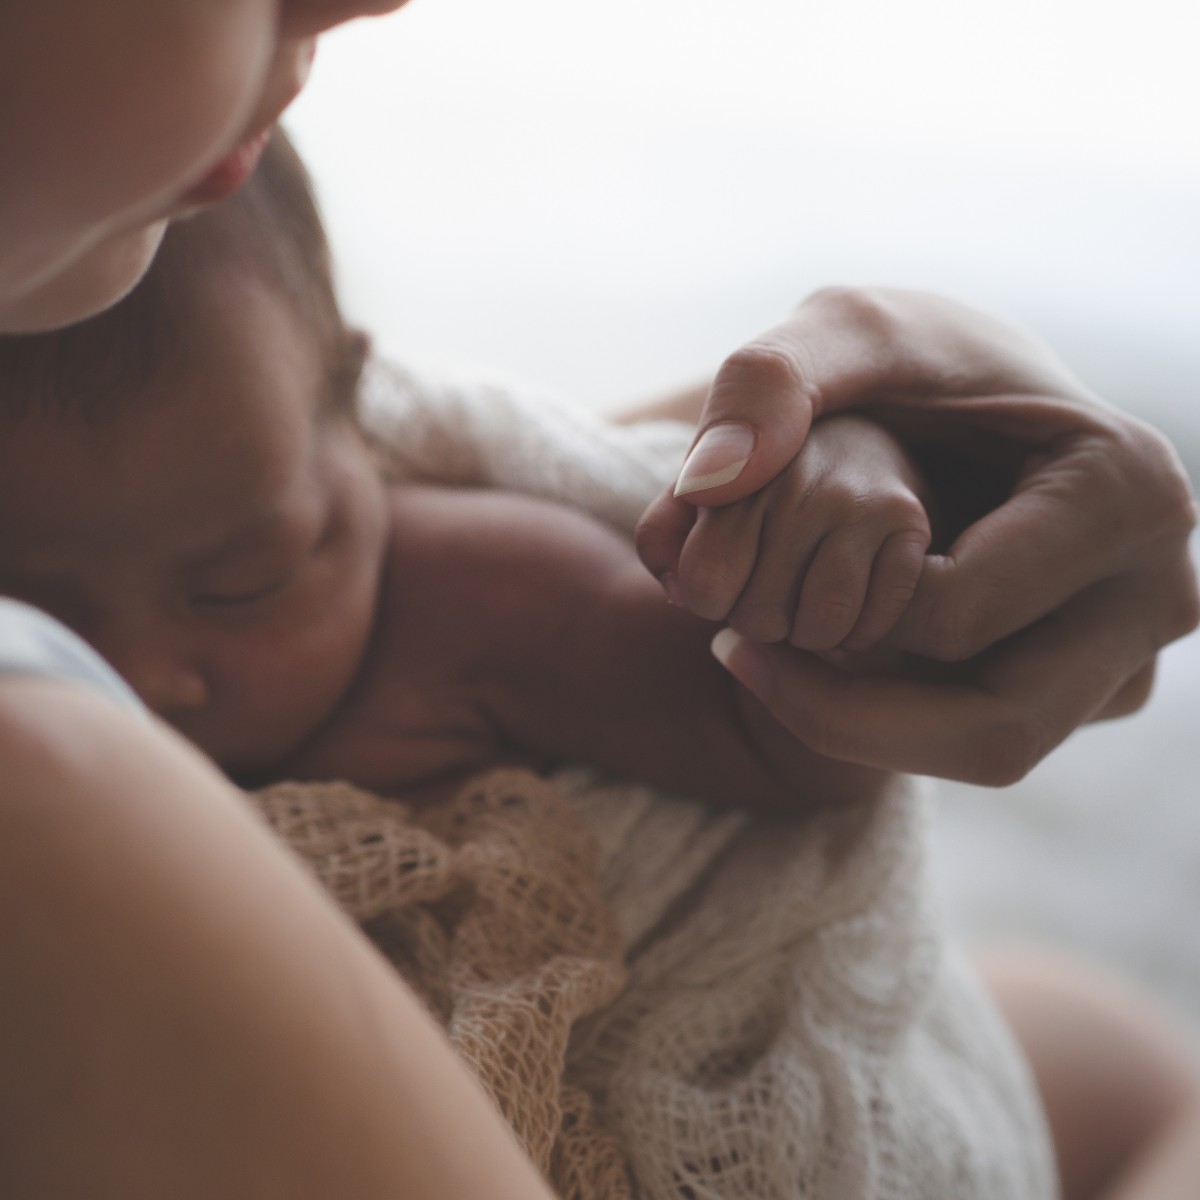 A high street voucher scheme has been shown to be helpful in supporting new mothers, who stopped smoking during their pregnancy, to maintain abstinence from smoking in their first year postpartum. #Research Find out more: brnw.ch/21wITuy